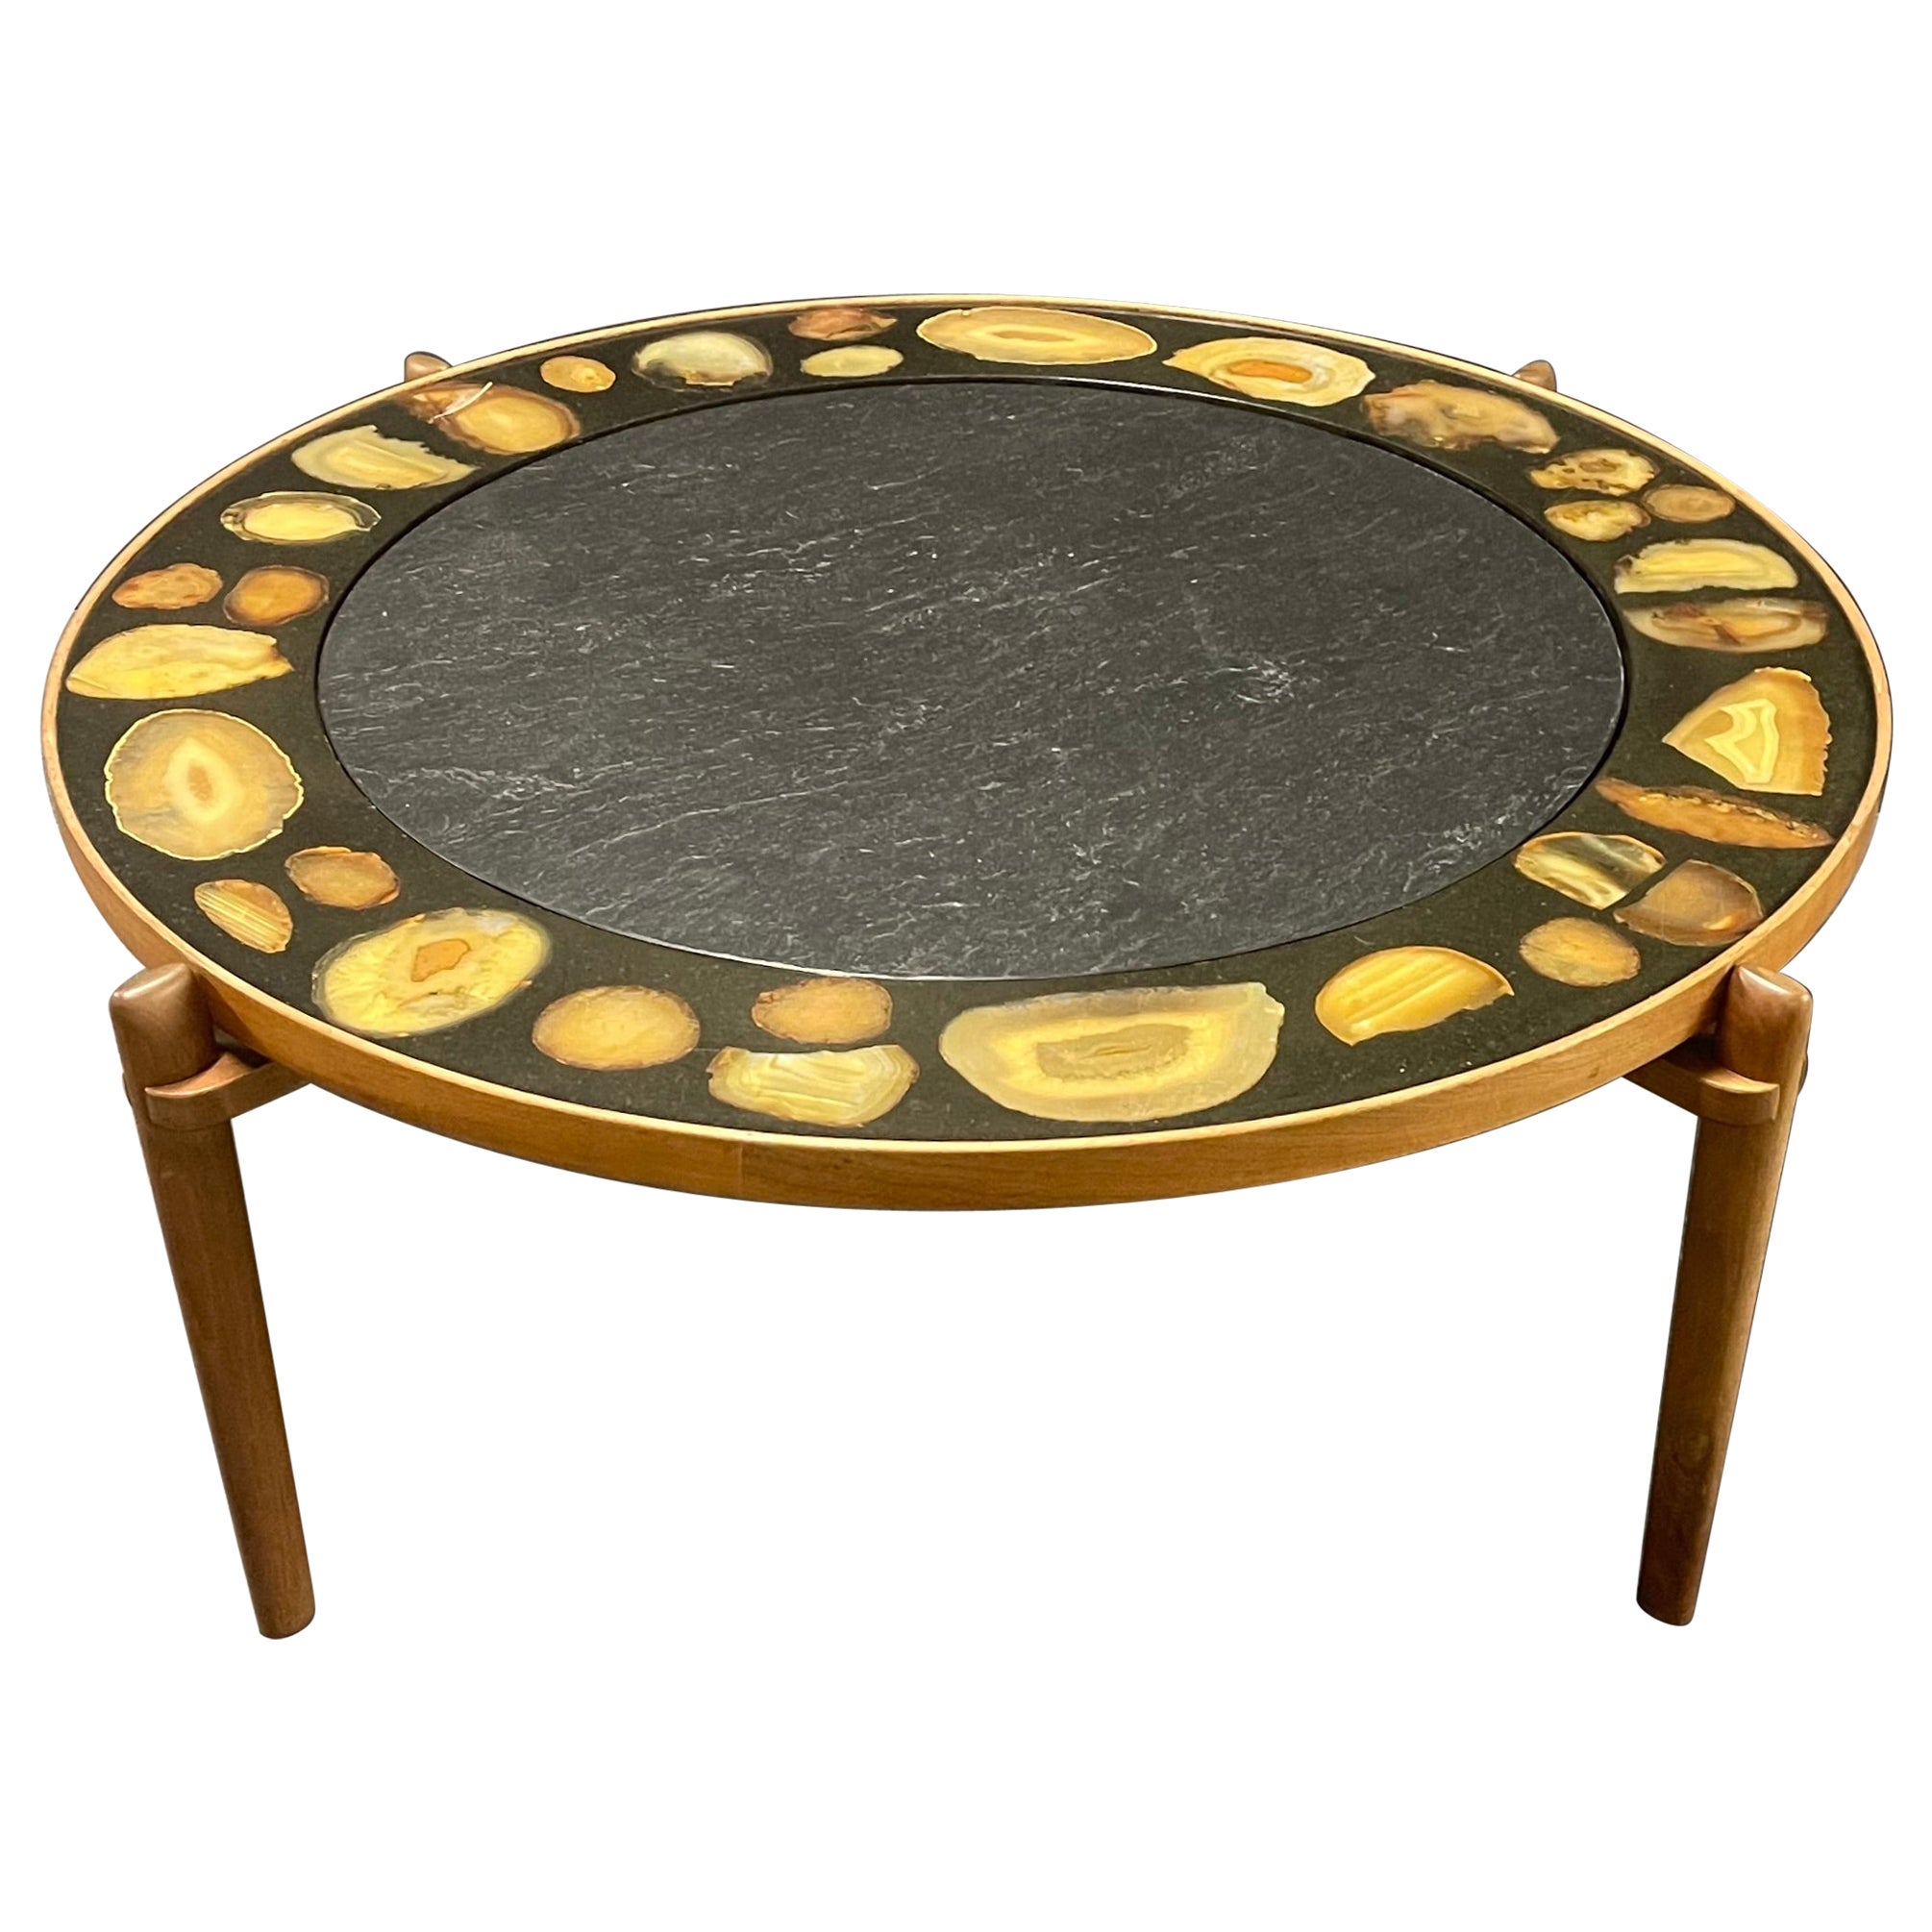 Very Rare and Exclusive Cocktail Table with Agate Inlays and Teakwood Base For Sale